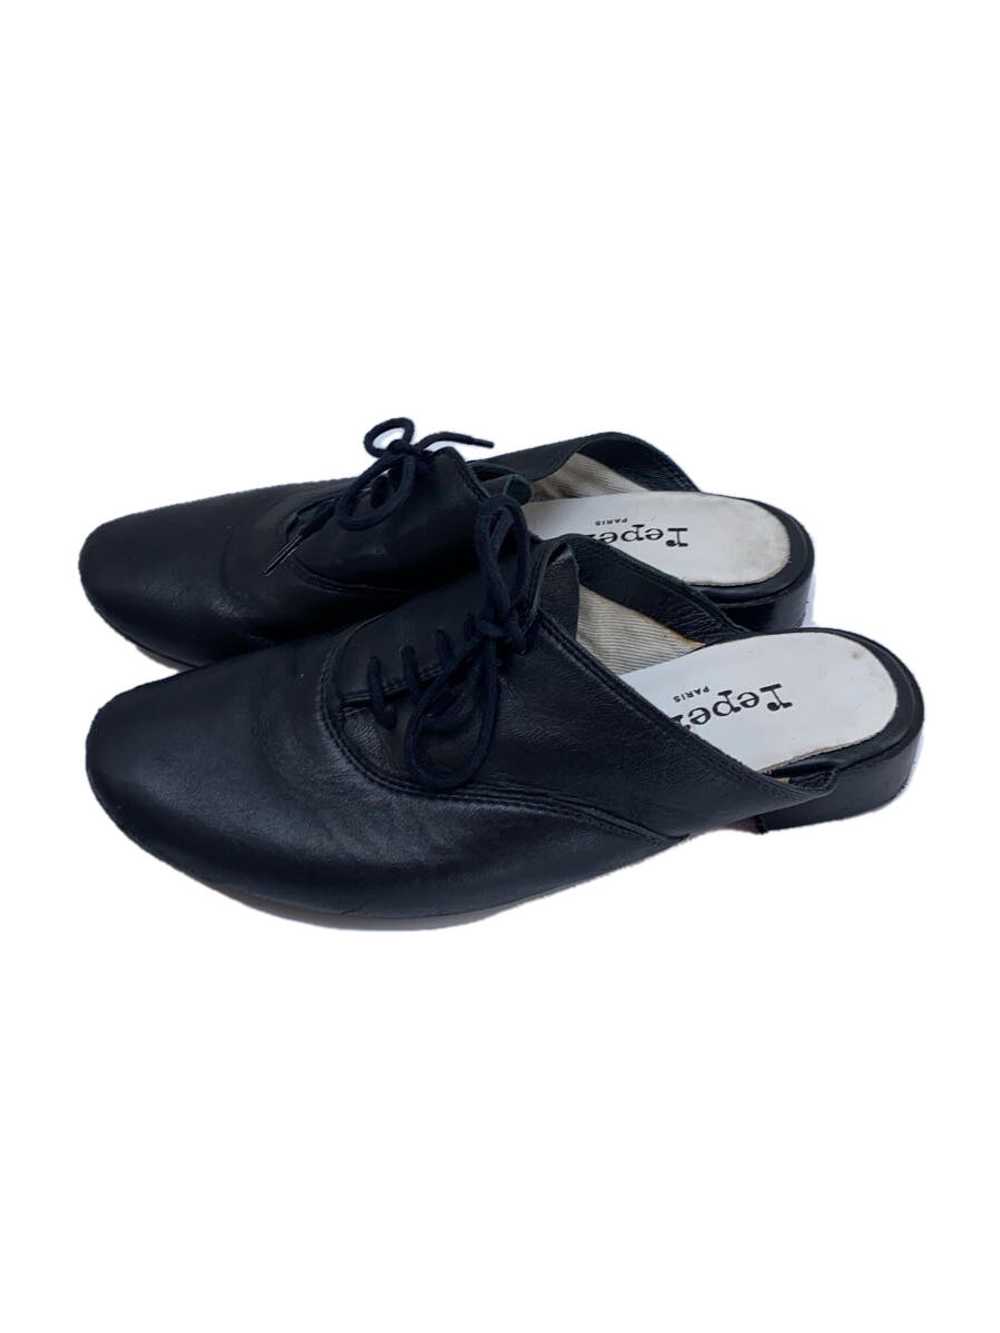 Repetto Mules/Shoes/35/Blk/Leather Shoes BbQ47 - image 1